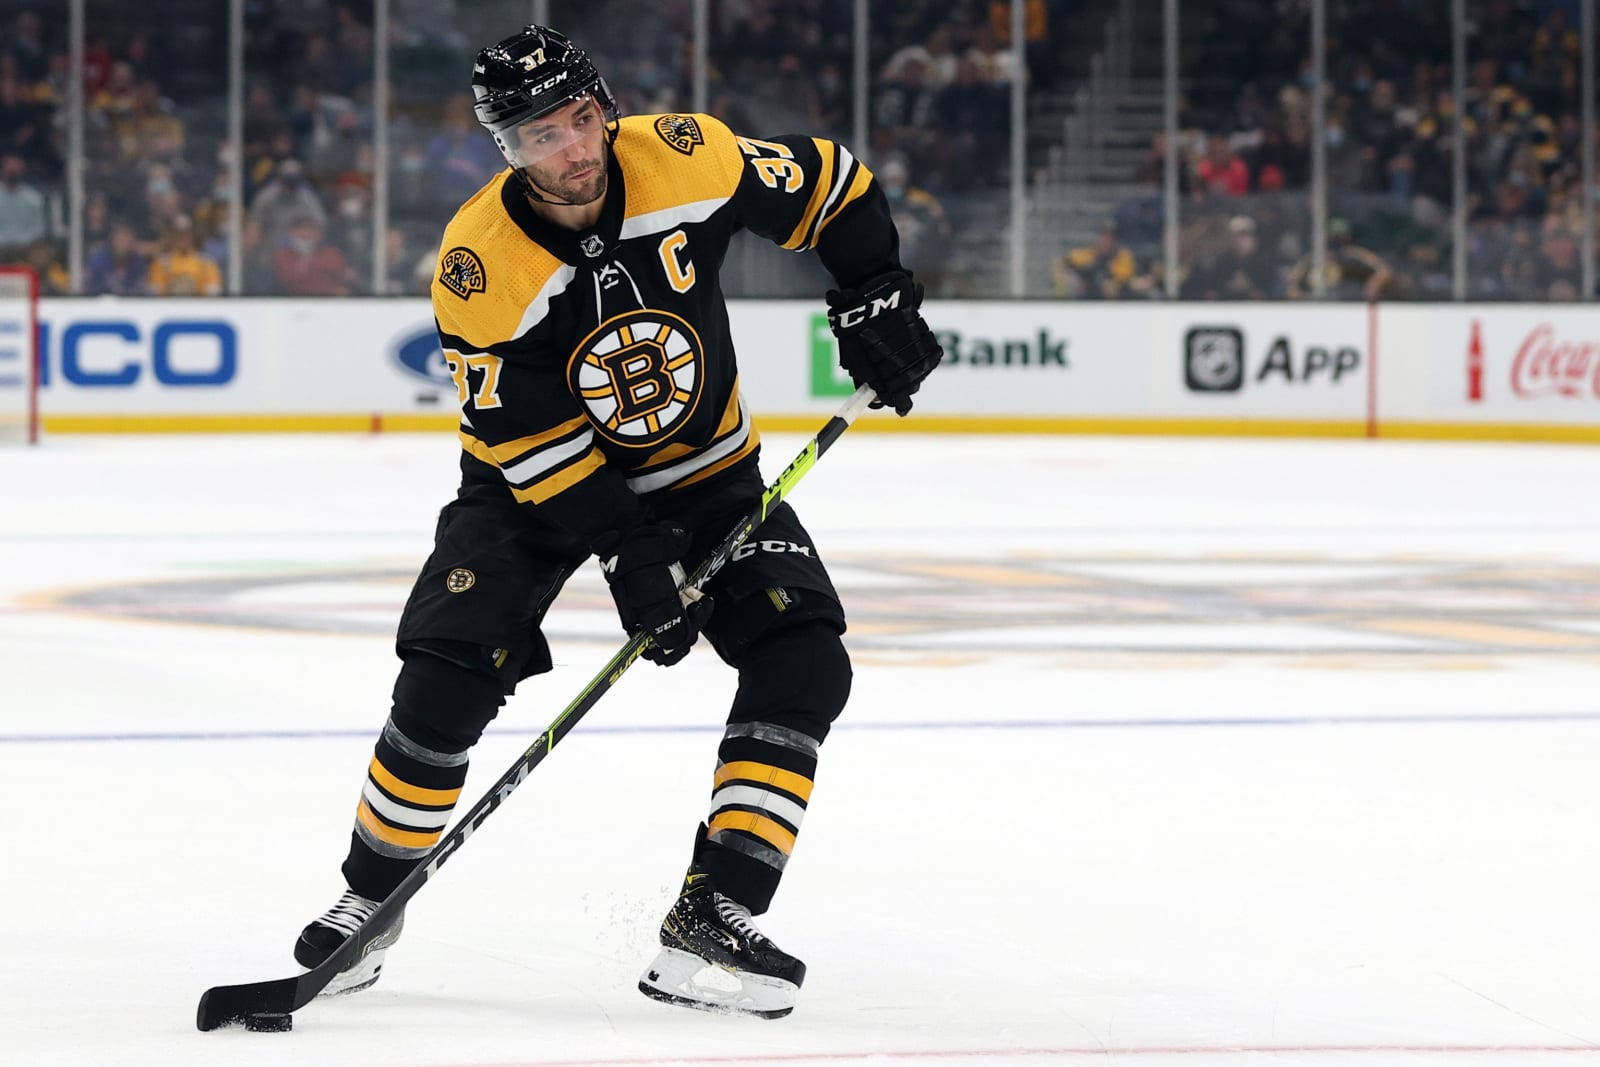 Patrice Bergeron In Action On Ice Hockey